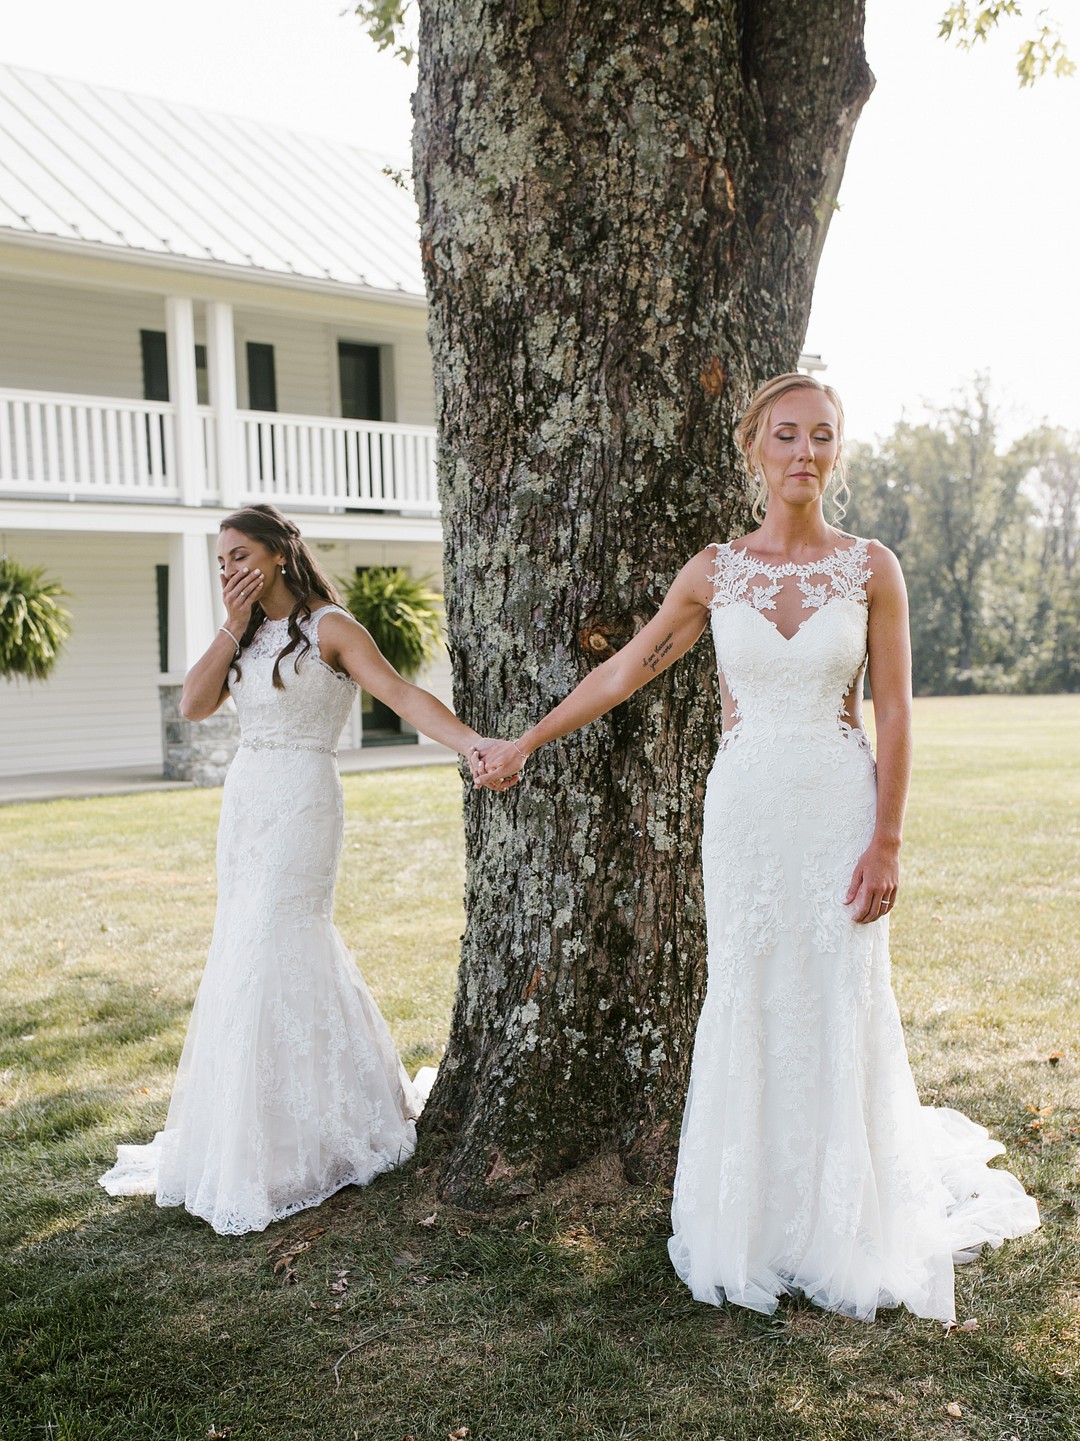 Rustic, elegant early fall wedding in Sabillasville, Maryland LGBTQ+ weddings lesbian wedding two brides long white dresses outdoors South Carolina Southern September wedding sunflowers first look